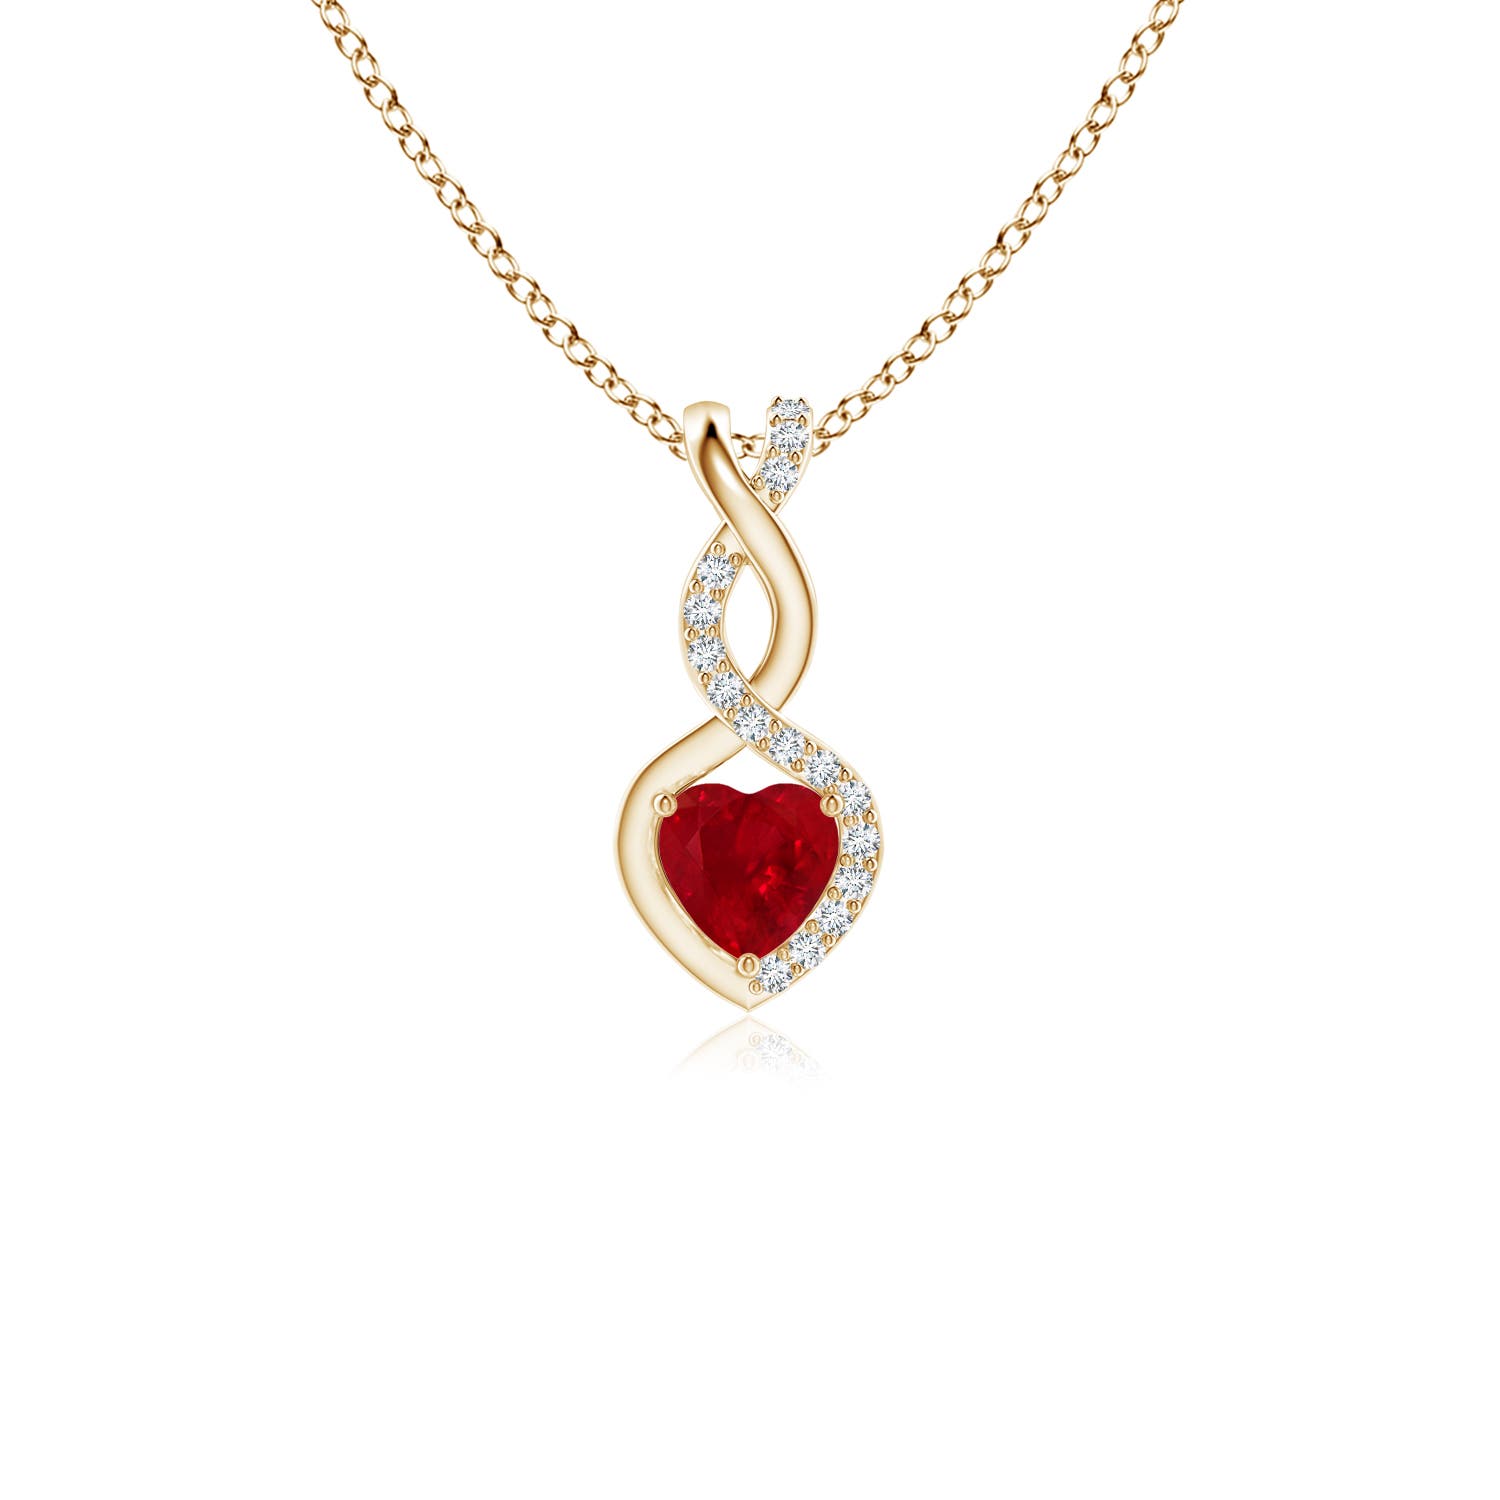 AAA - Ruby / 0.35 CT / 14 KT Yellow Gold